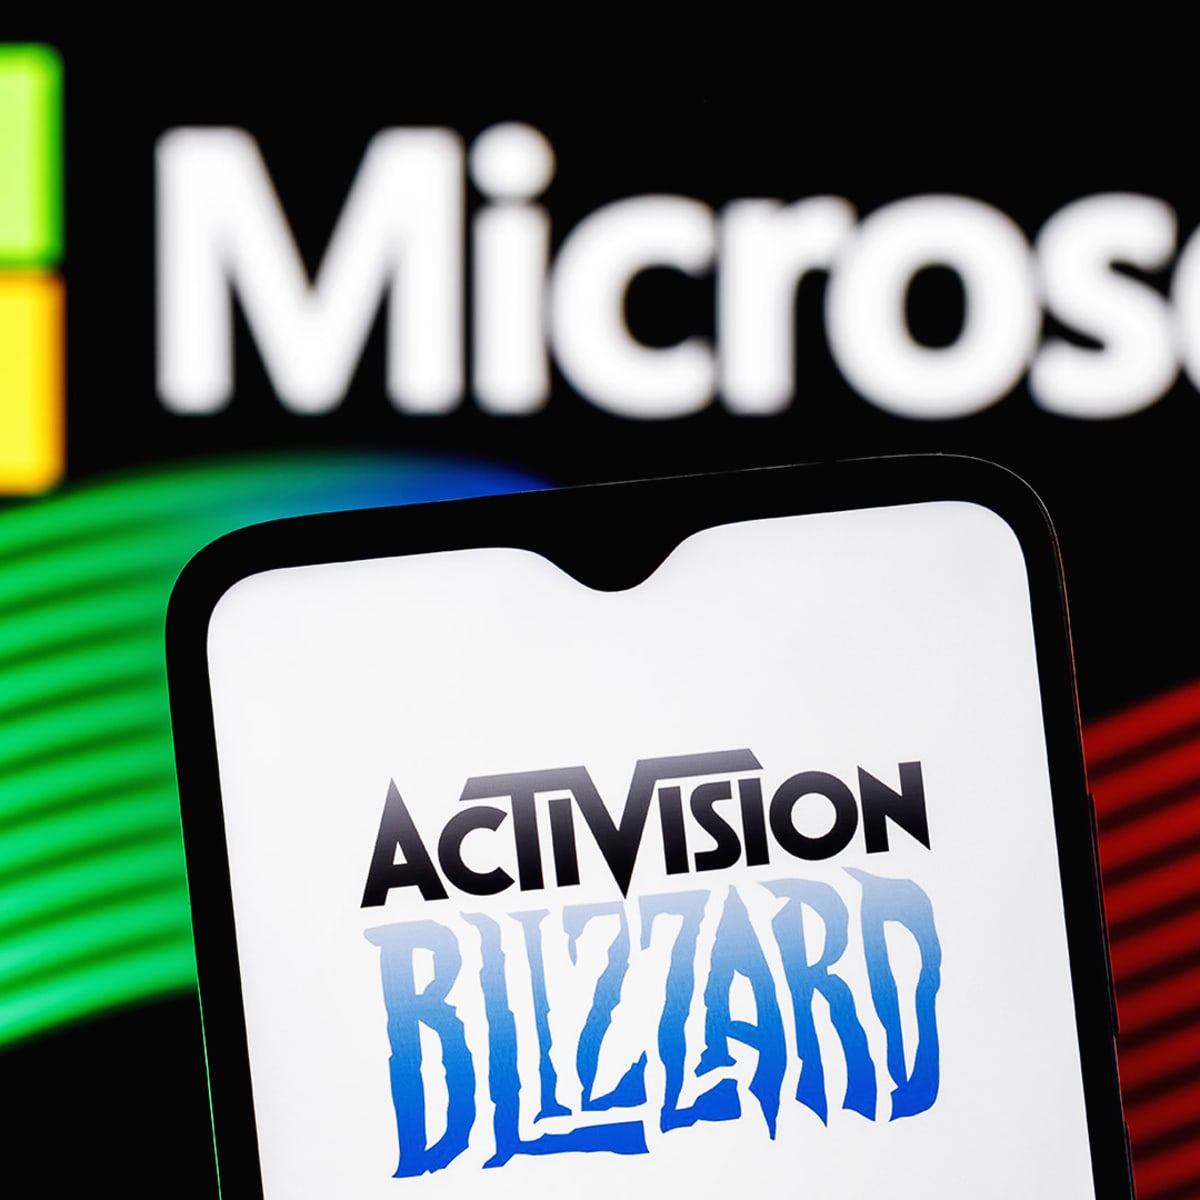 activision blizzard: Microsoft welcomes Activision Blizzard and their teams  to Xbox - The Economic Times